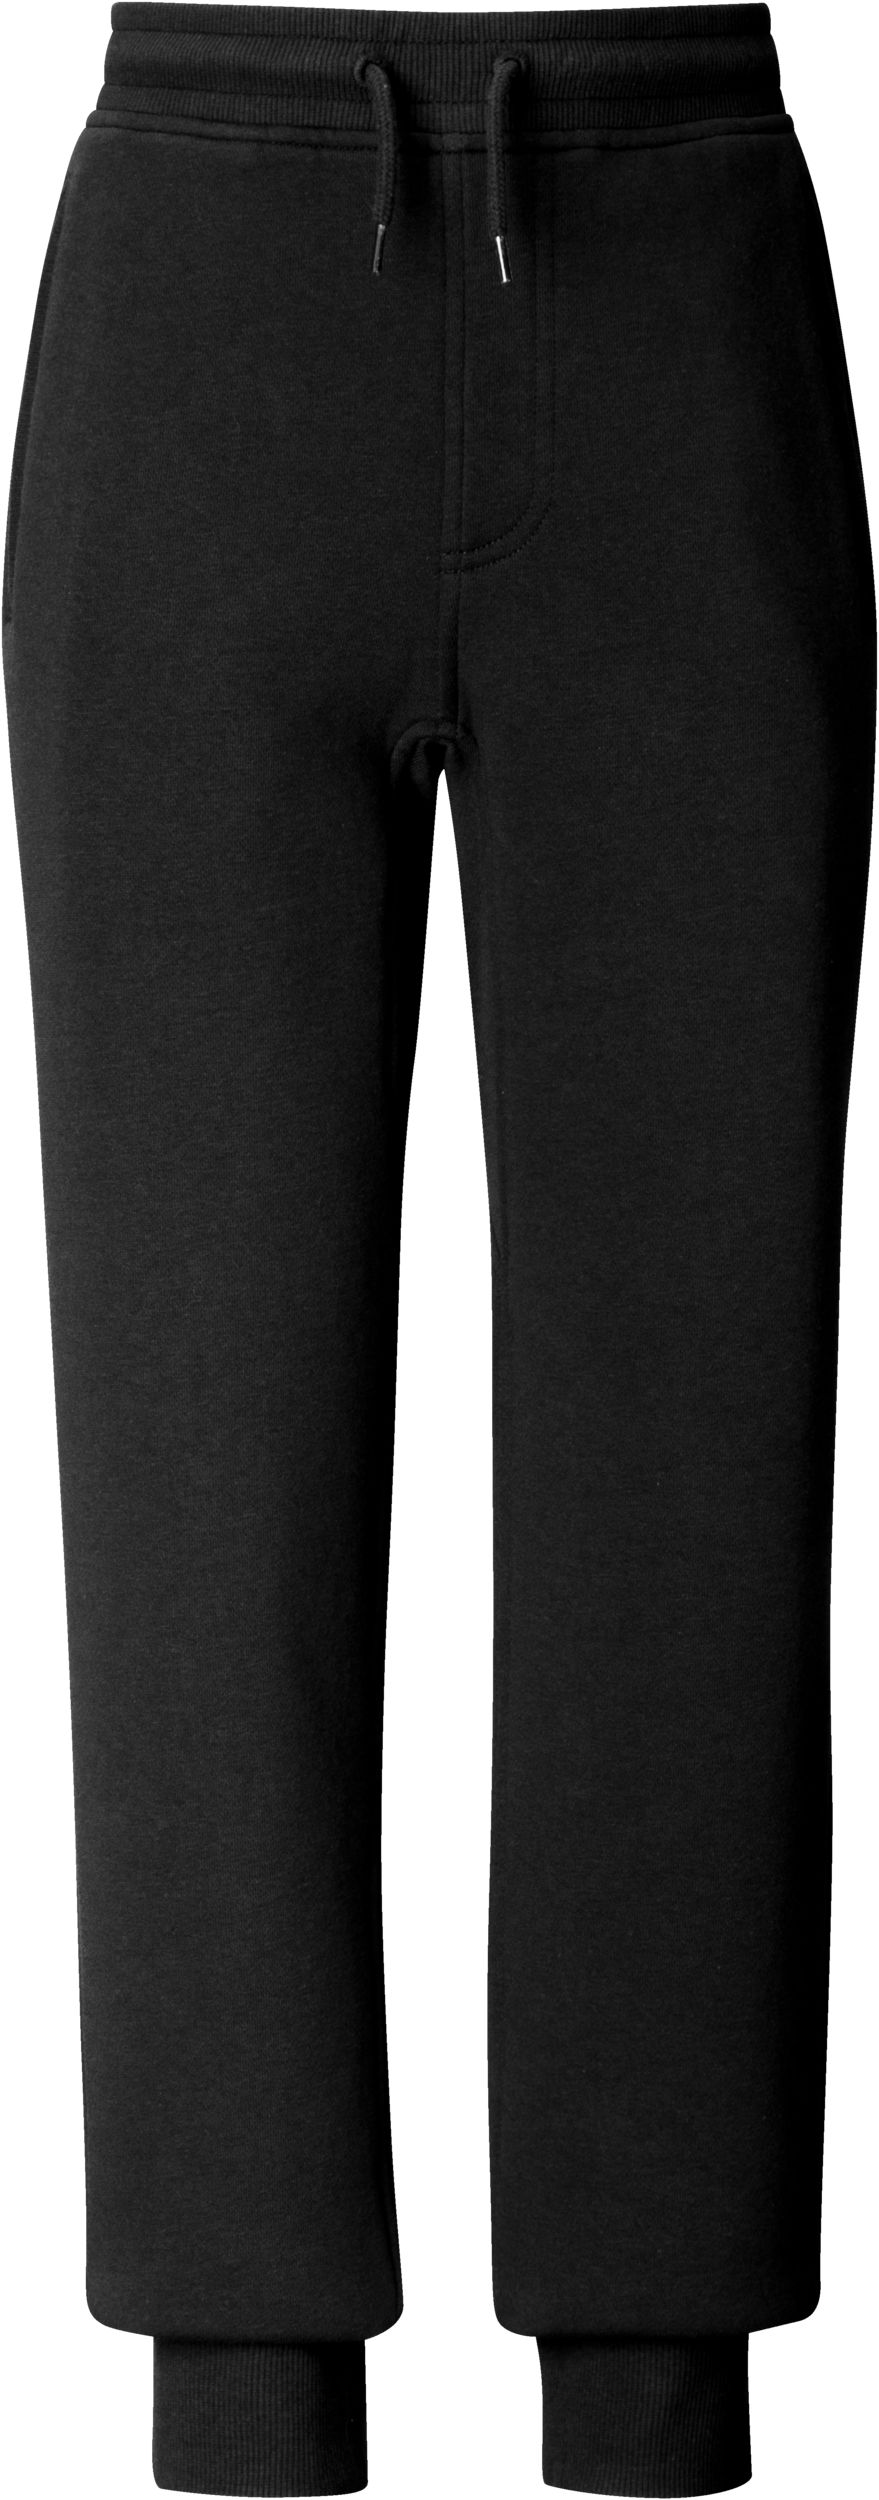 Ripzone Boys' Roe Sweatpants  Kids' Tapered Cuffed Woven Athletic